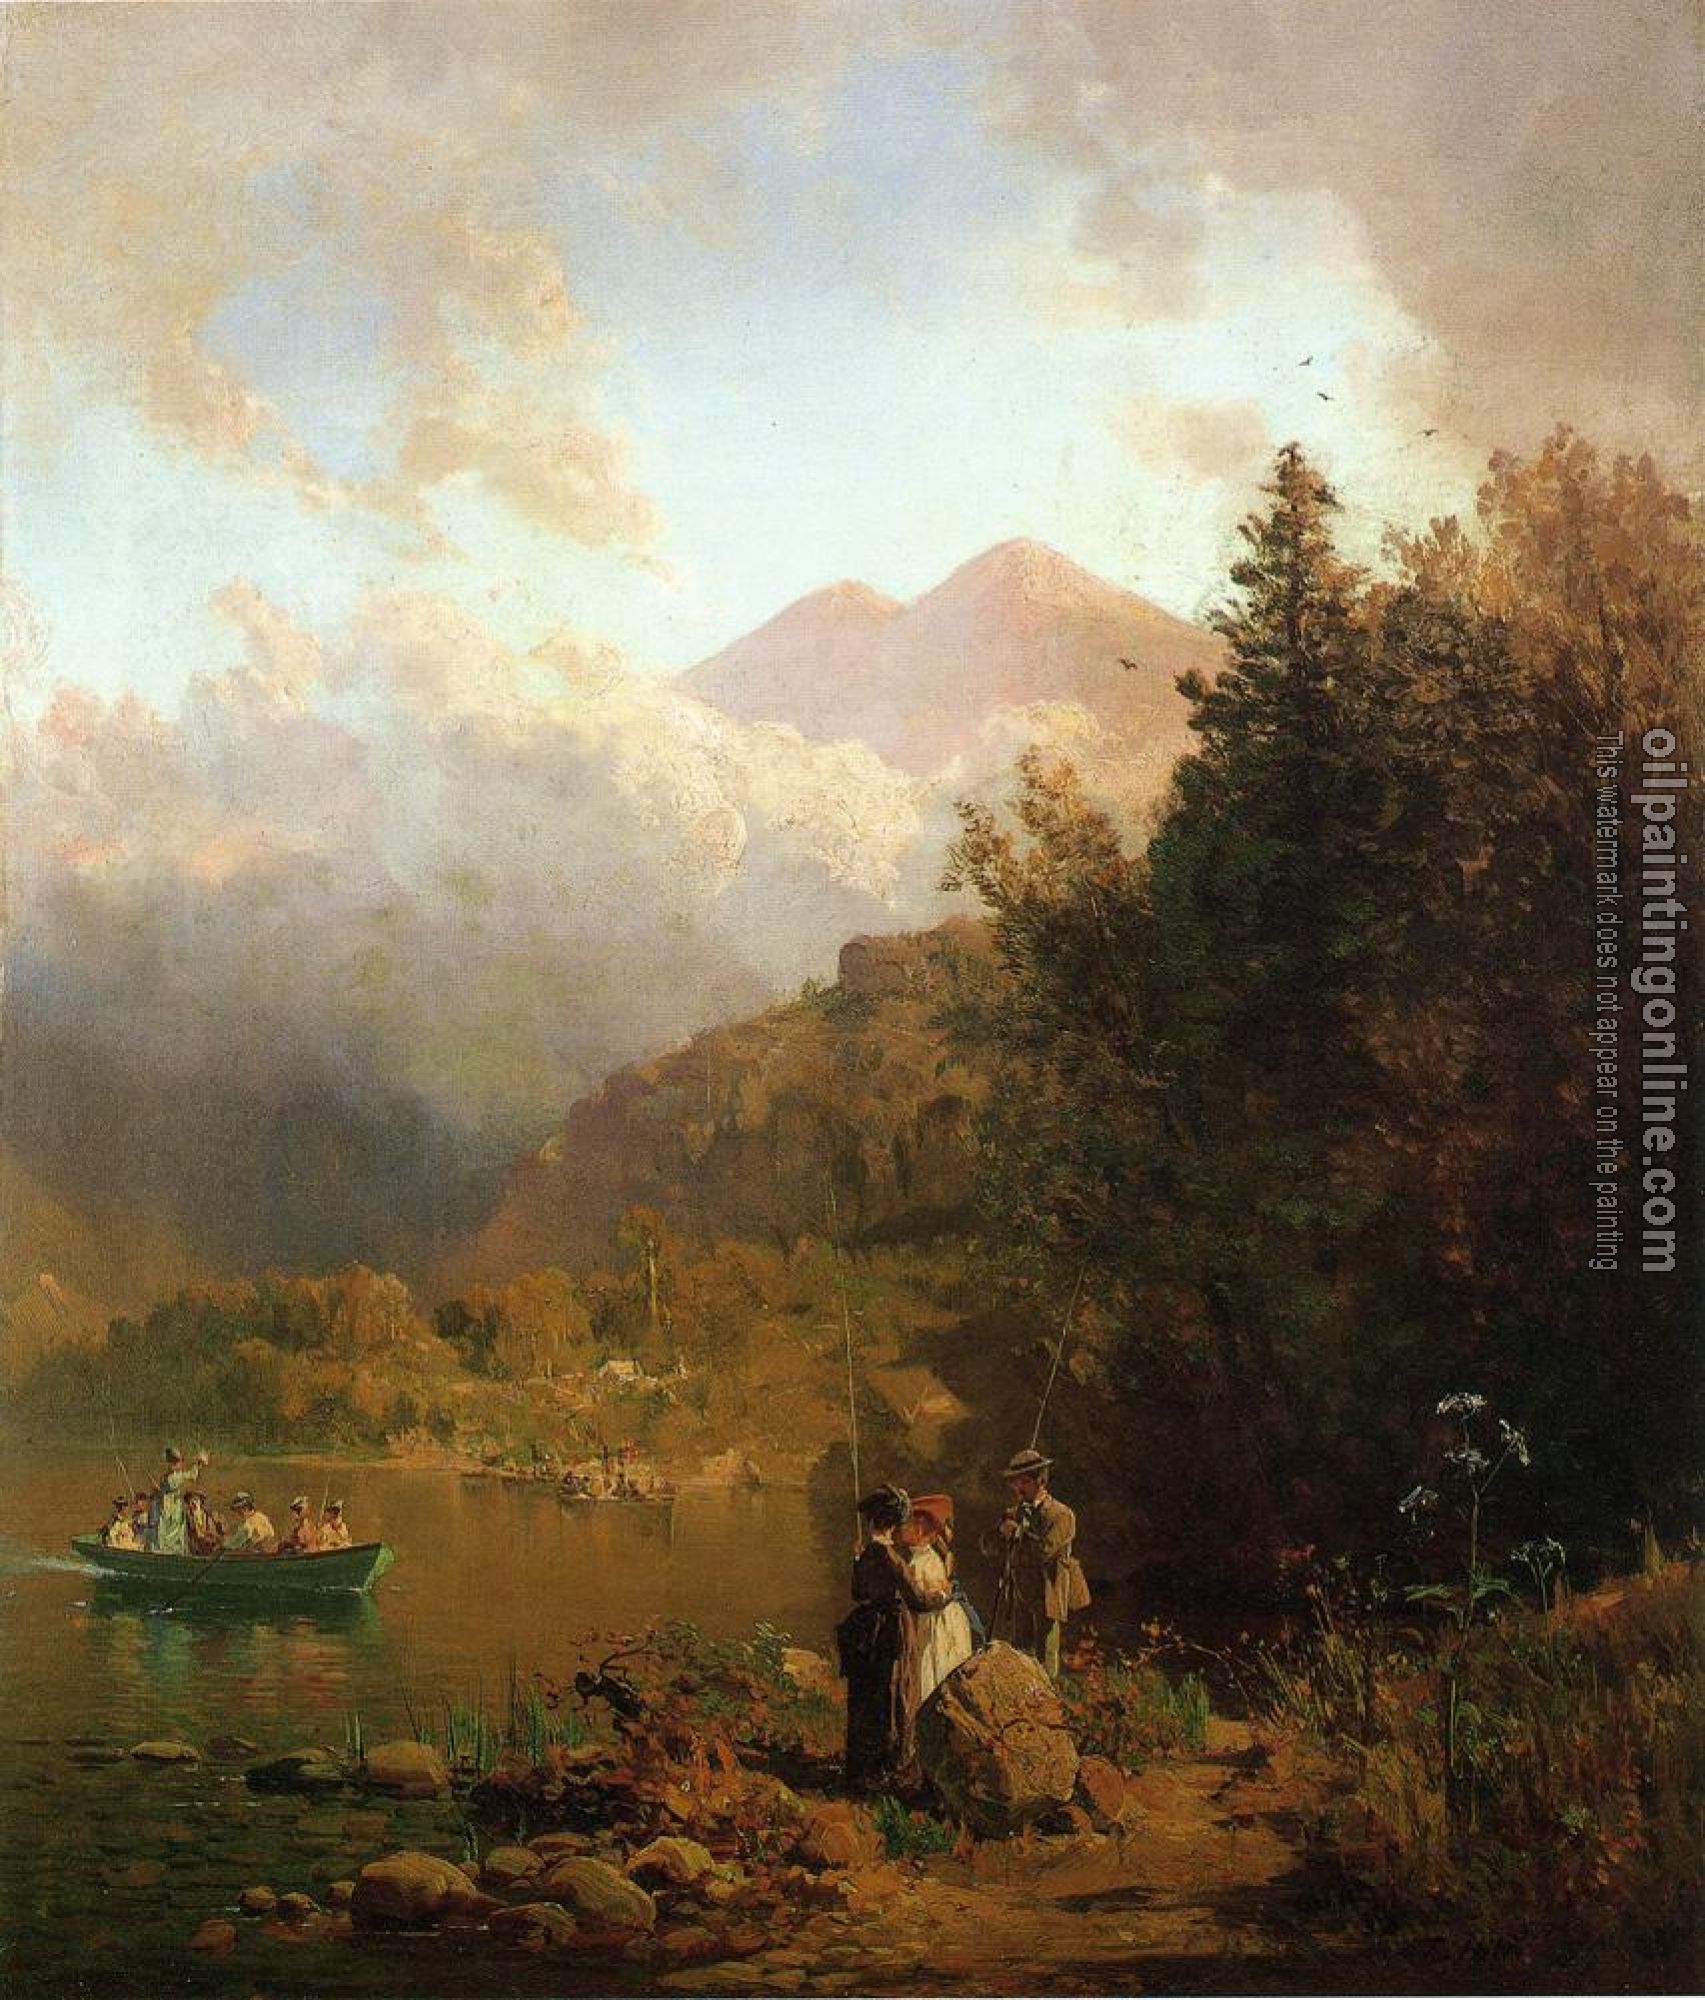 Thomas Hill - Fishing Party in the Mountains